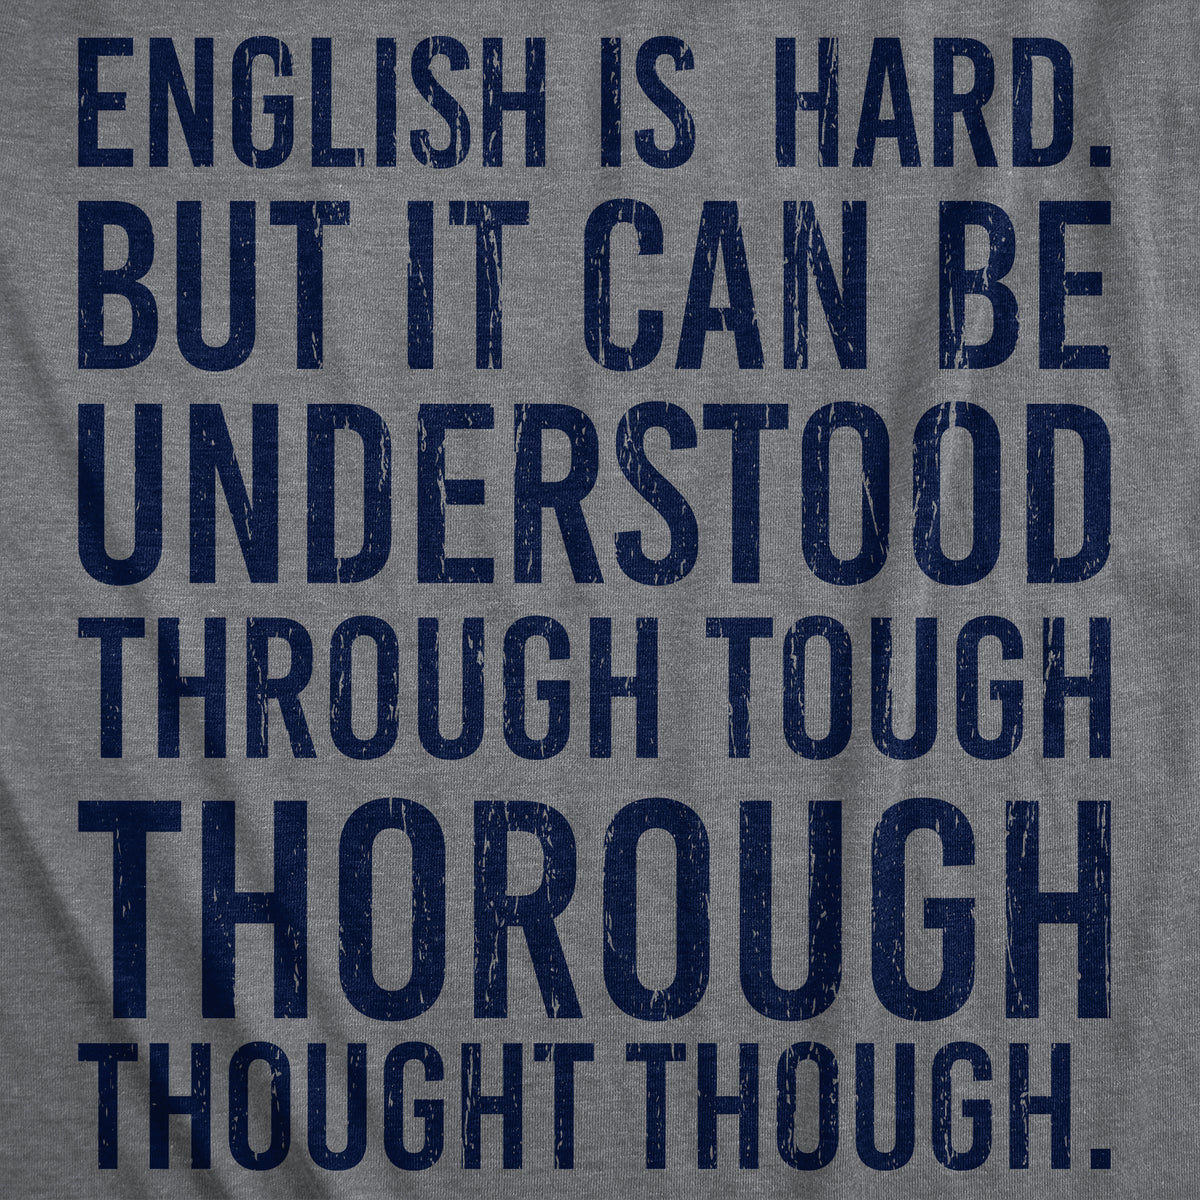 English Is Hard But It Can Be Understood Through Tough Thorough Thought Though Women&#39;s T Shirt